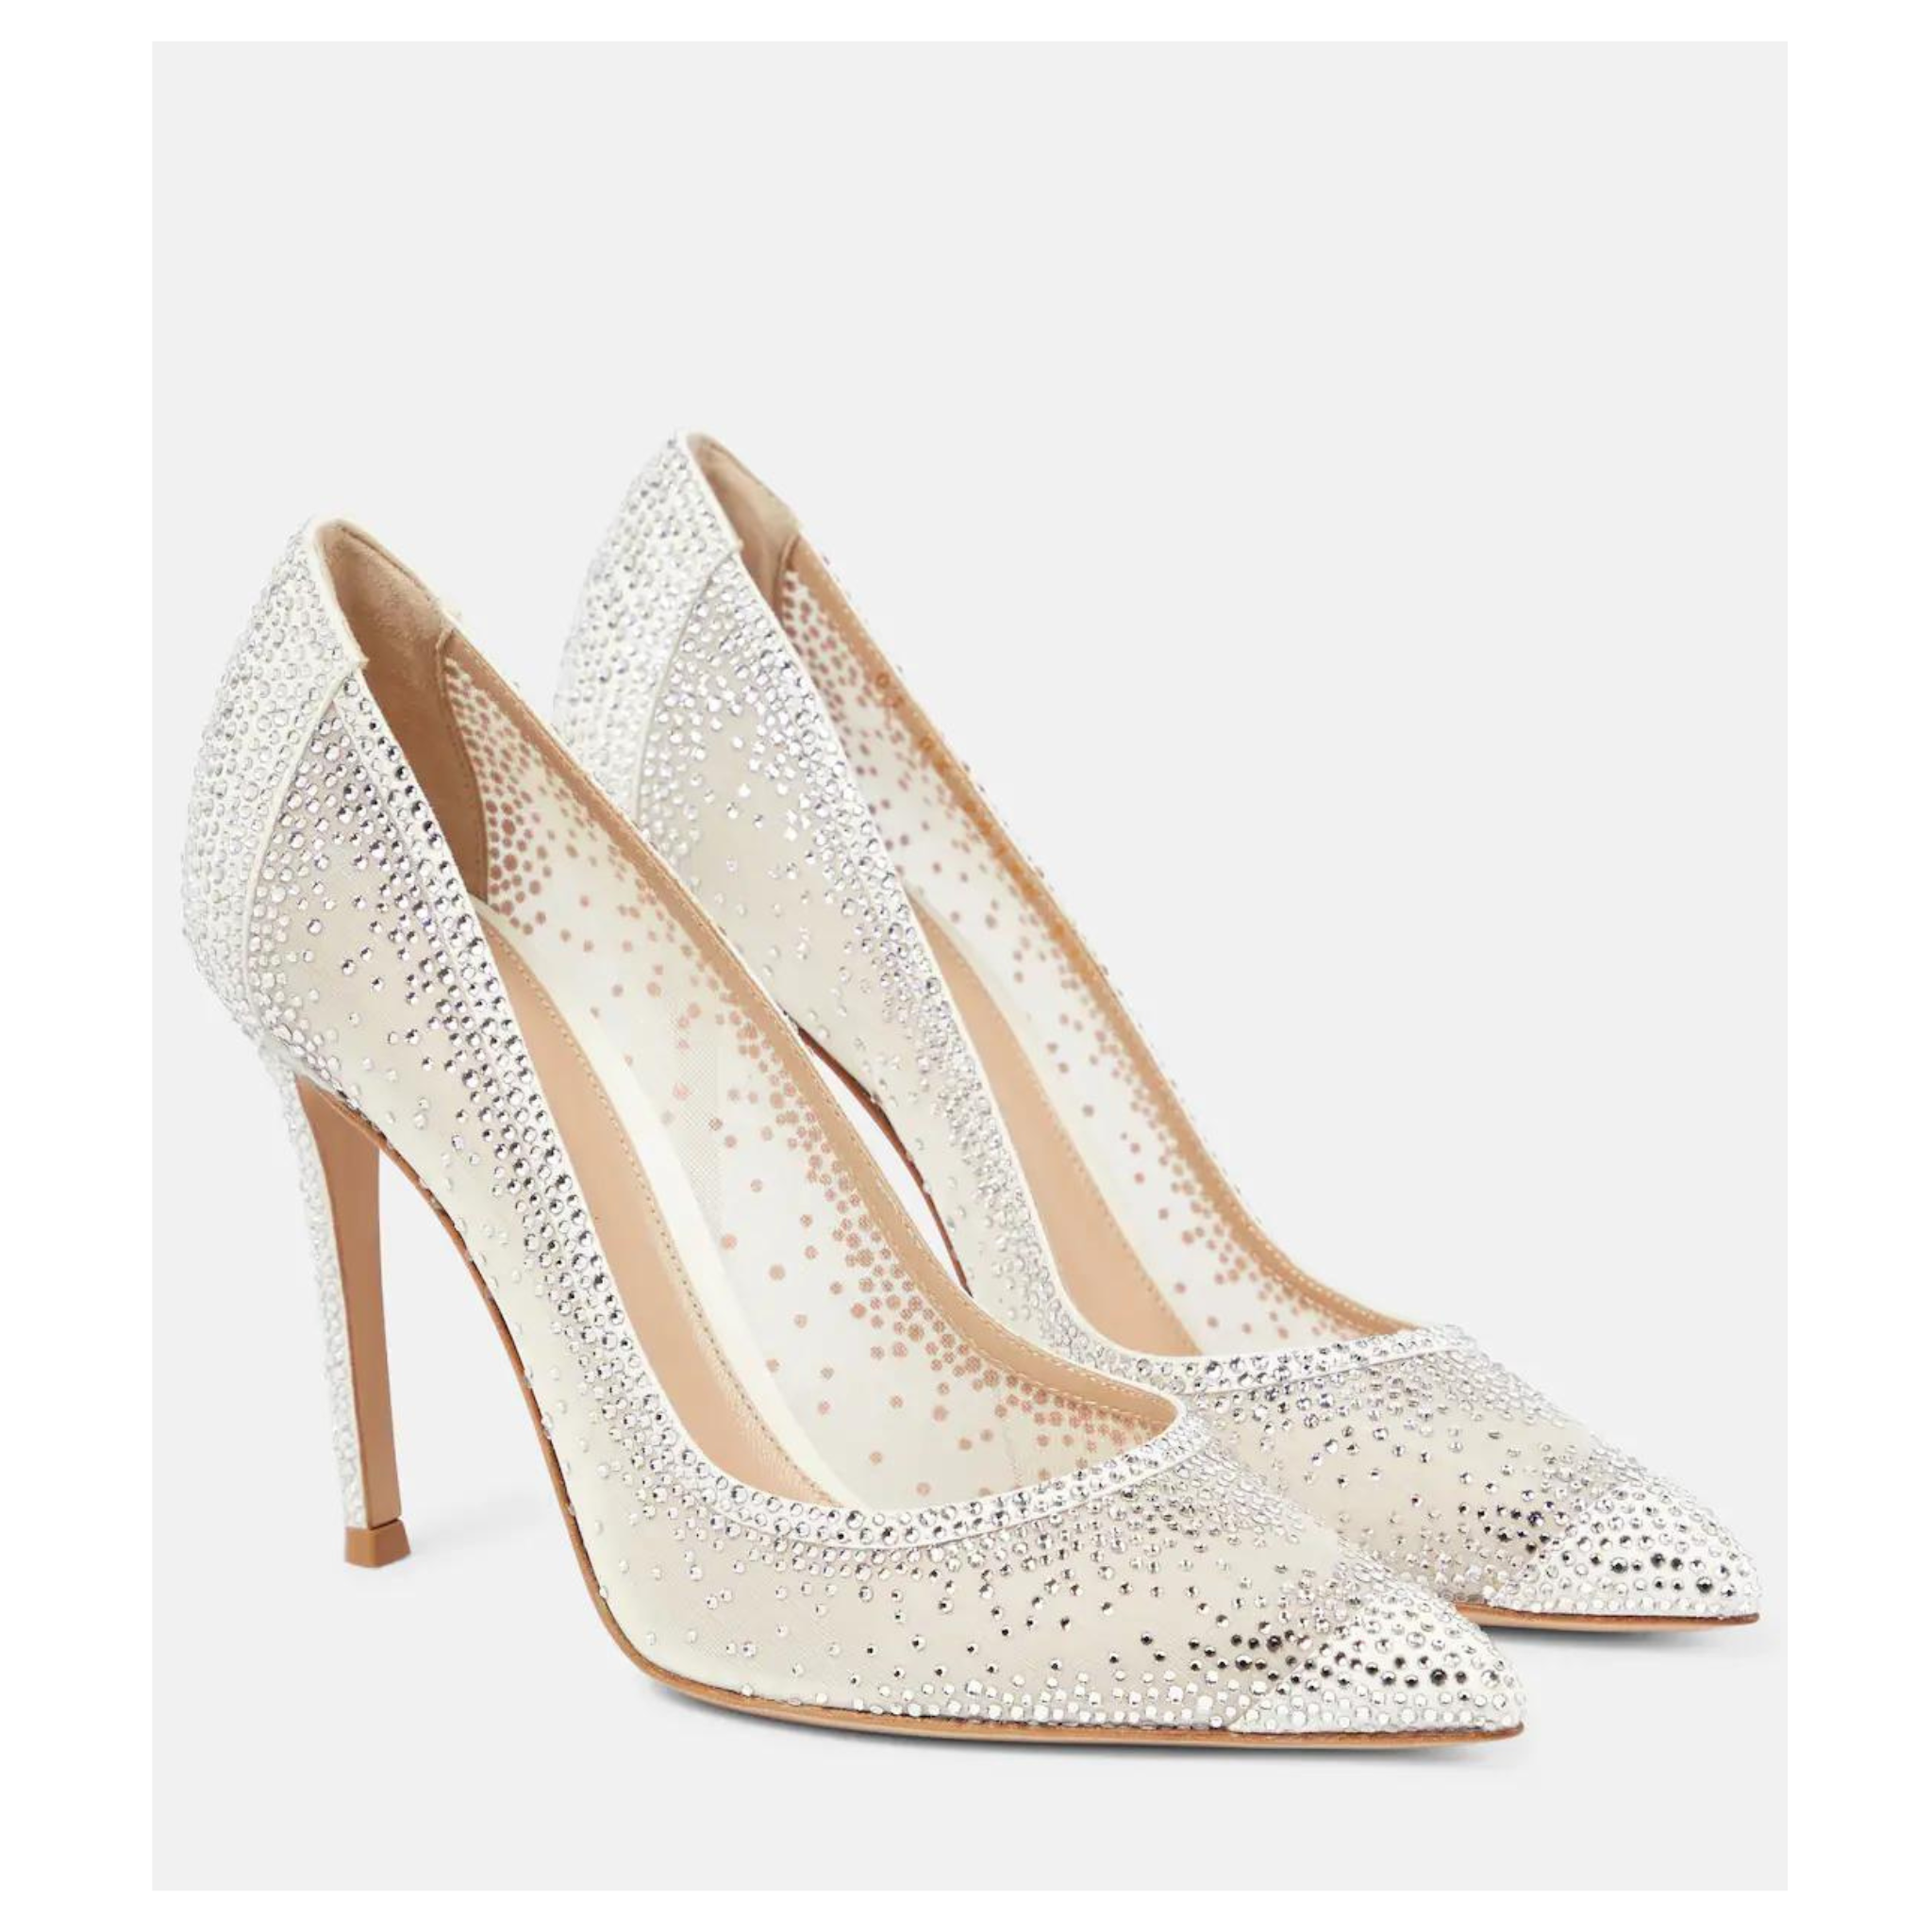 GIANVITO ROSSI Rania 105 embellished pumps